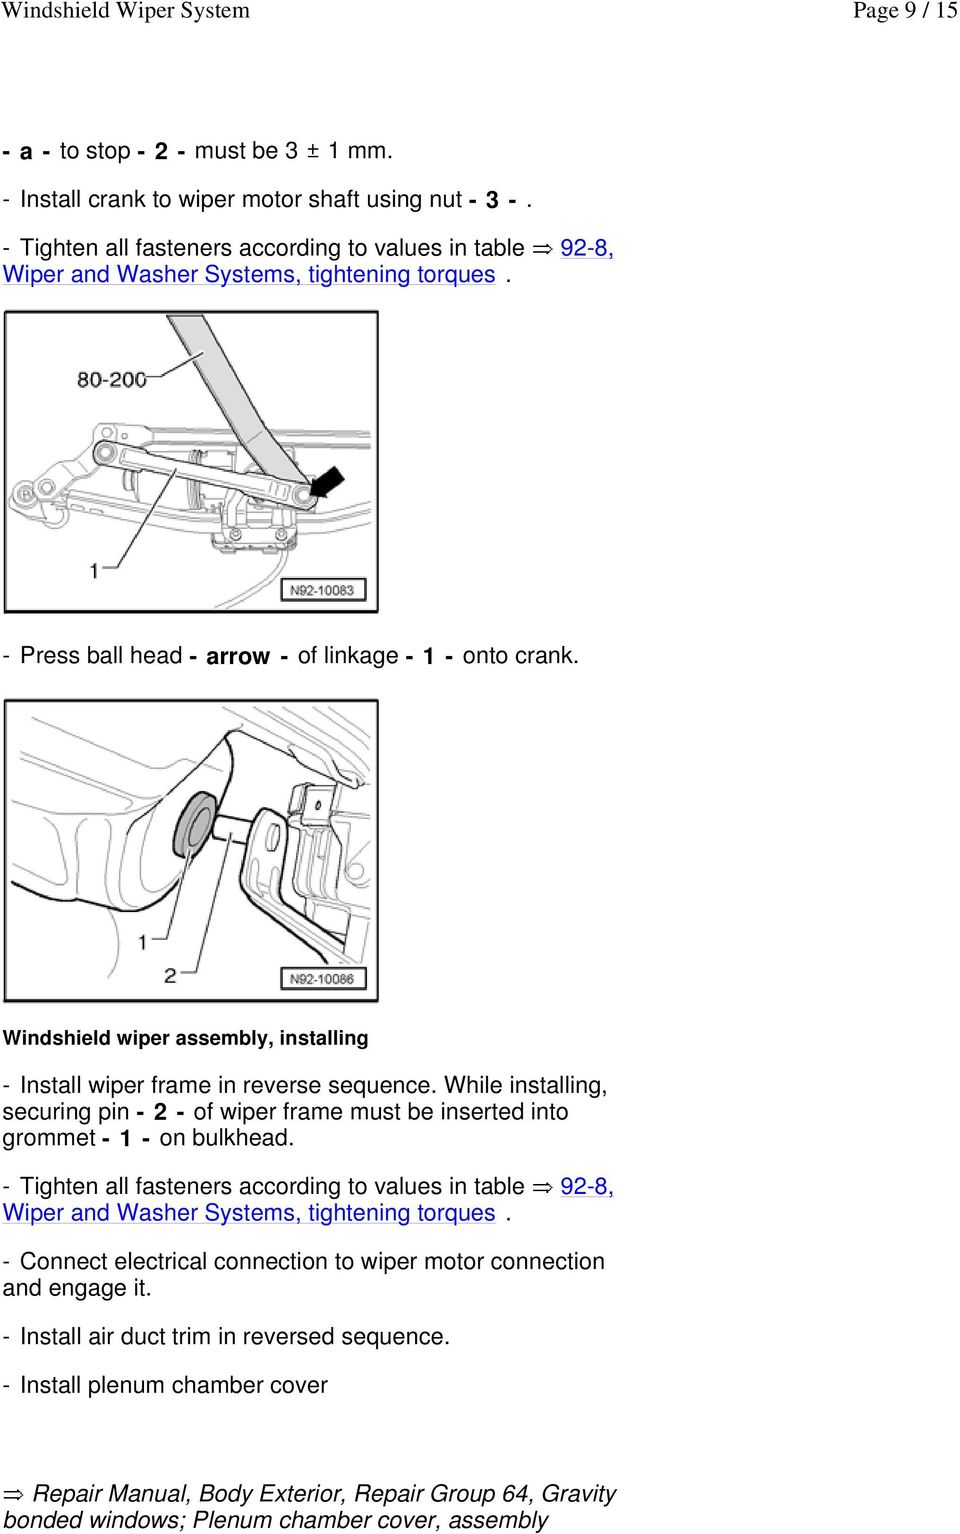 Windshield wiper assembly, installing - Install wiper frame in reverse sequence. While installing, securing pin - 2 - of wiper frame must be inserted into grommet - 1 - on bulkhead.